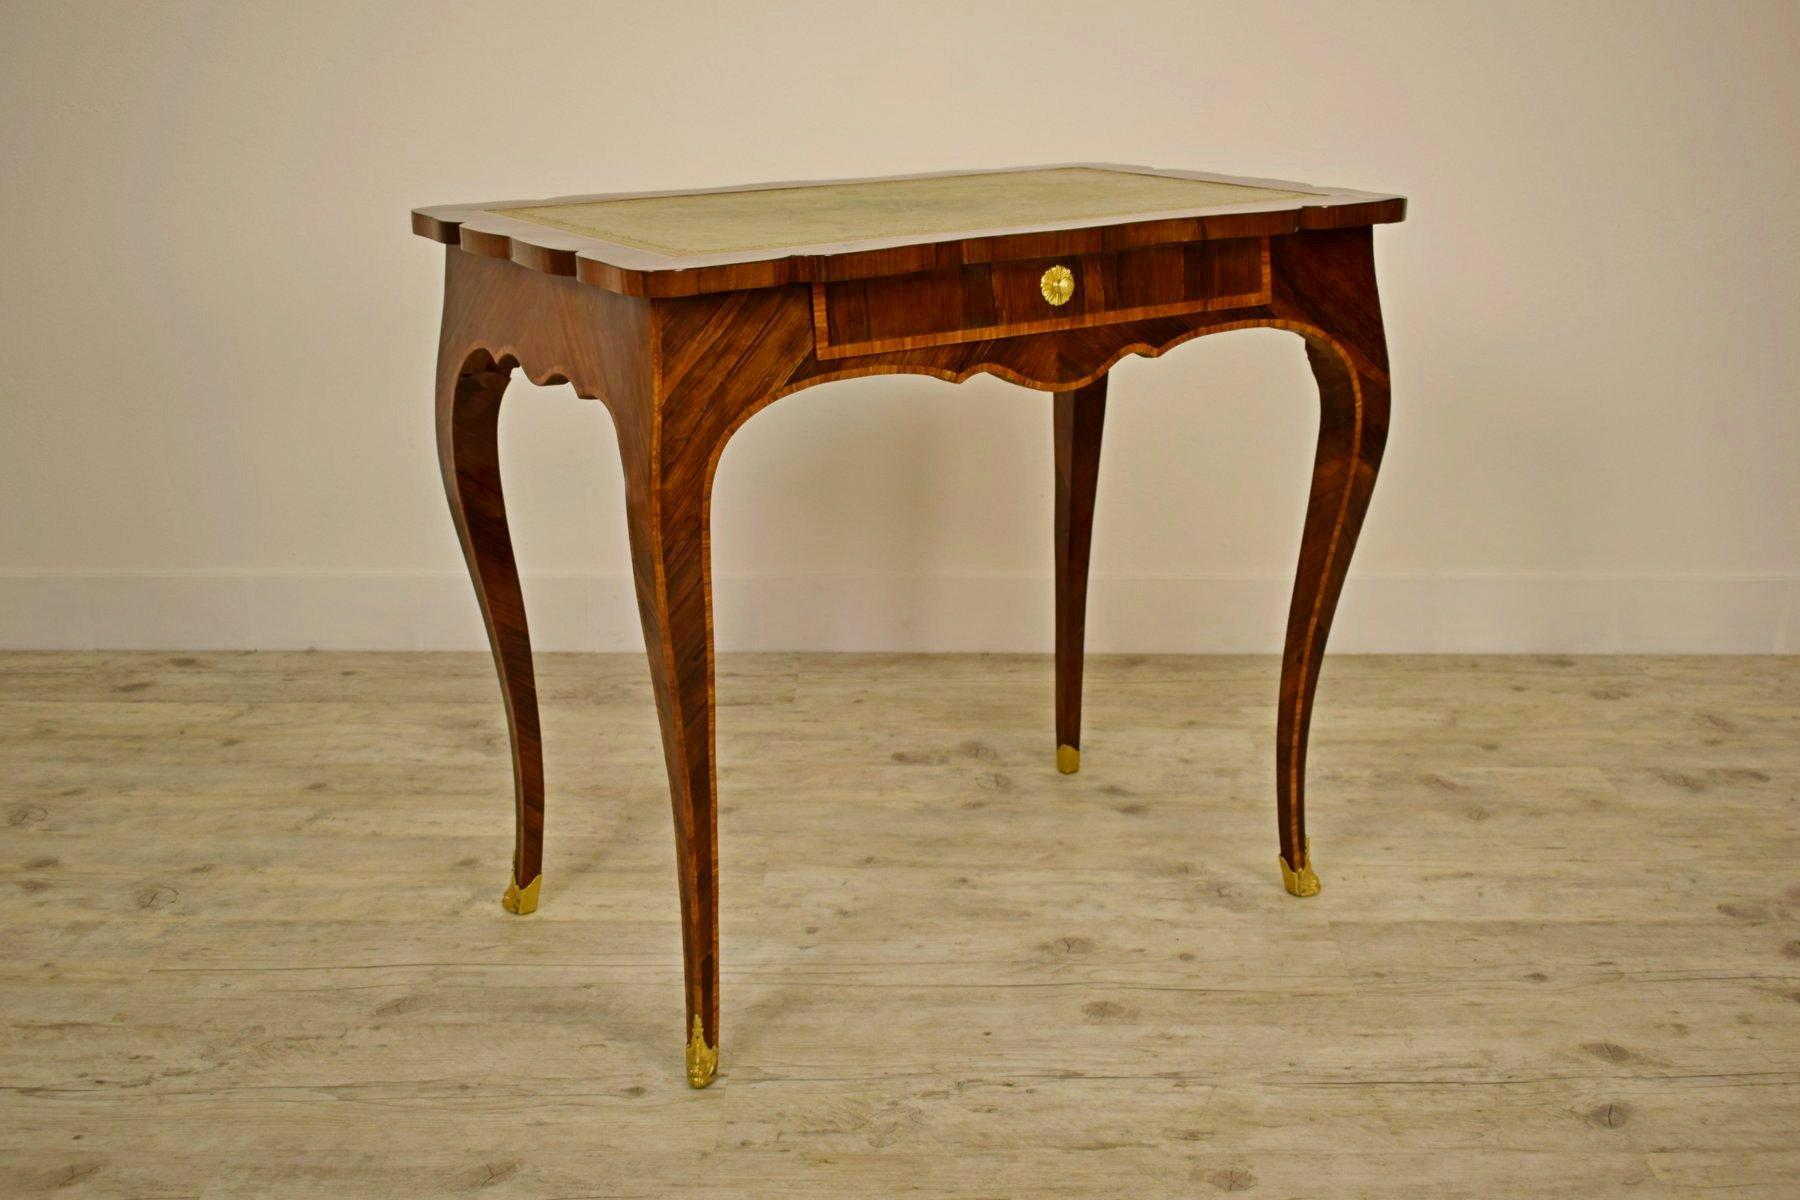 The elegant antique north Italian (Genoa) Louis XV period writing desk, called also bureau plat, is made of veneered and inlaid woods. It have a beautiful wavy line with slender but solid legs. The desk have an elegant green insert leather with a